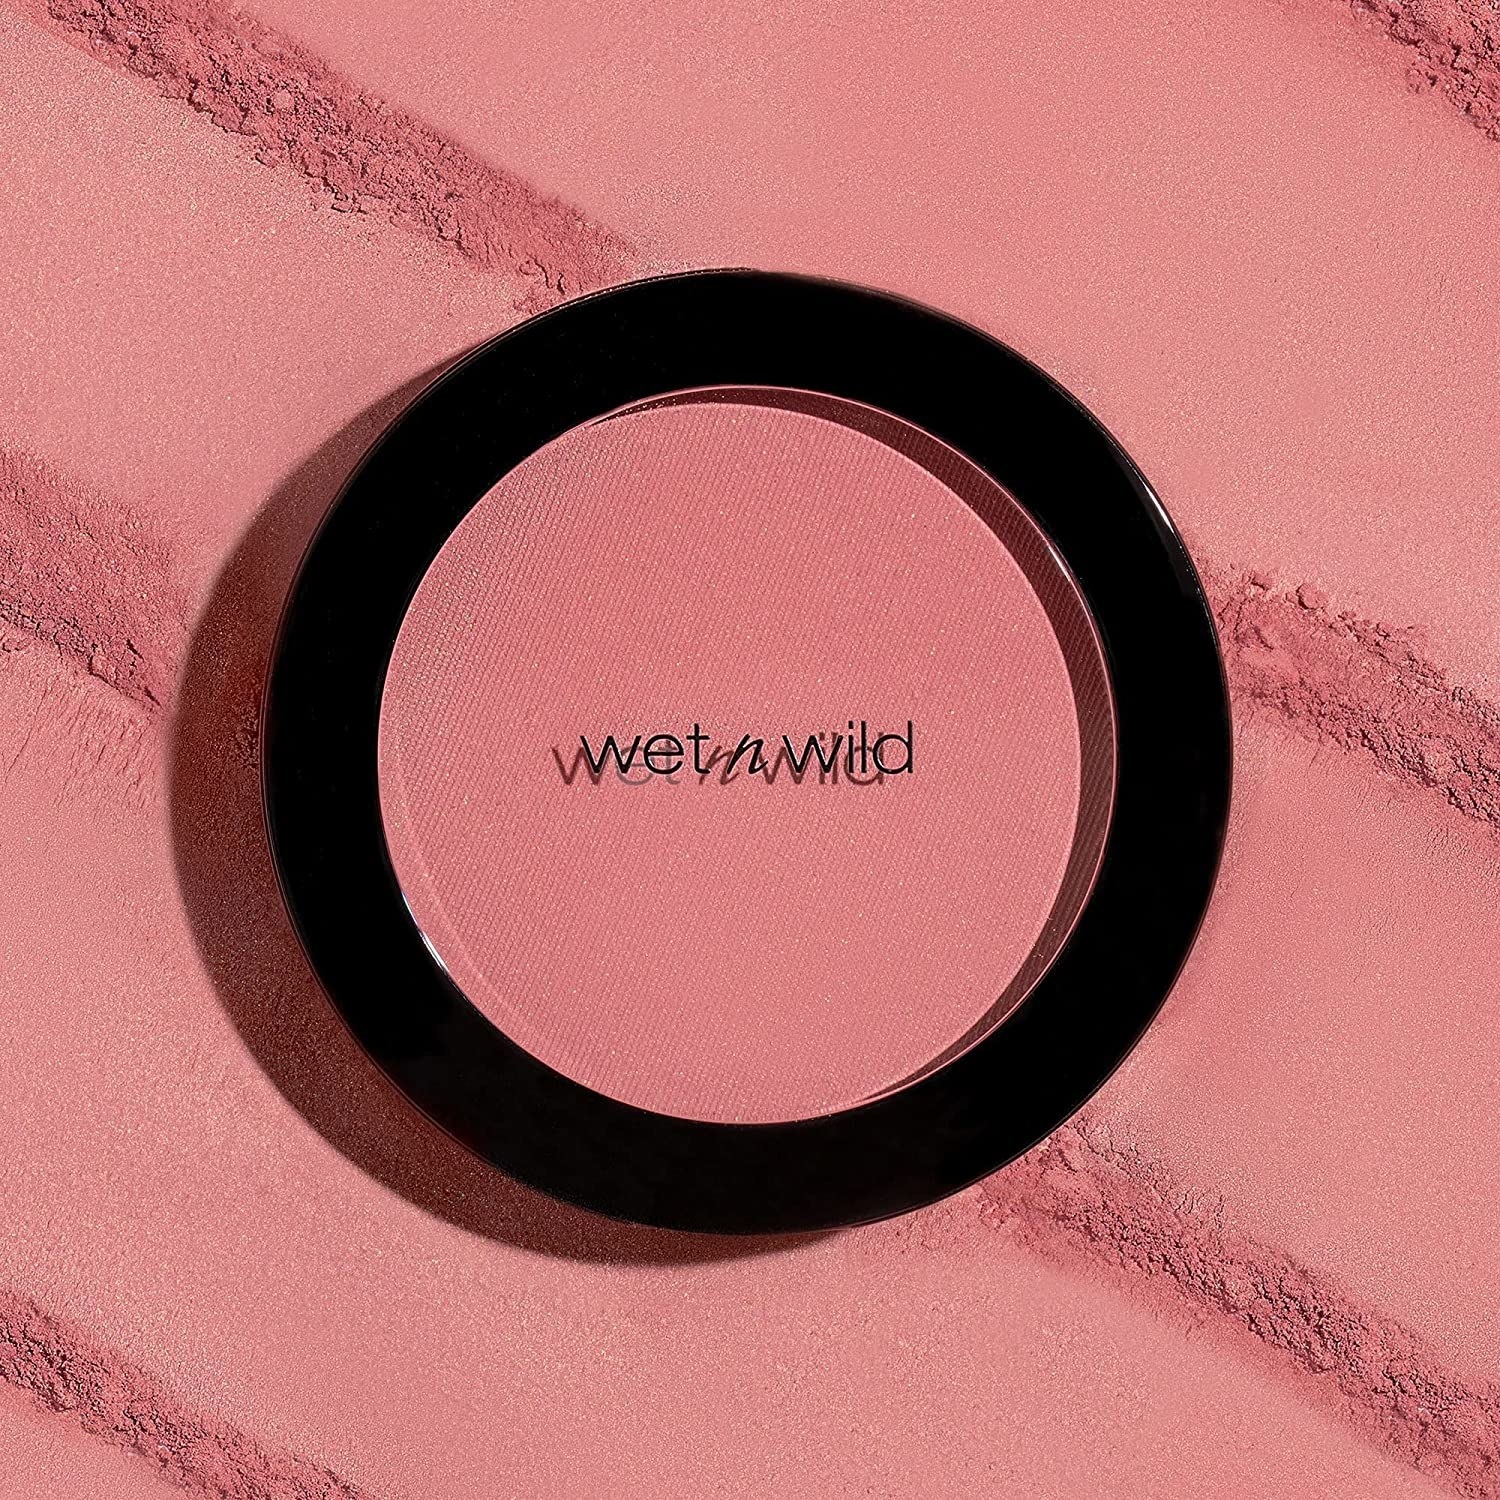 The blush on several swatches of the product